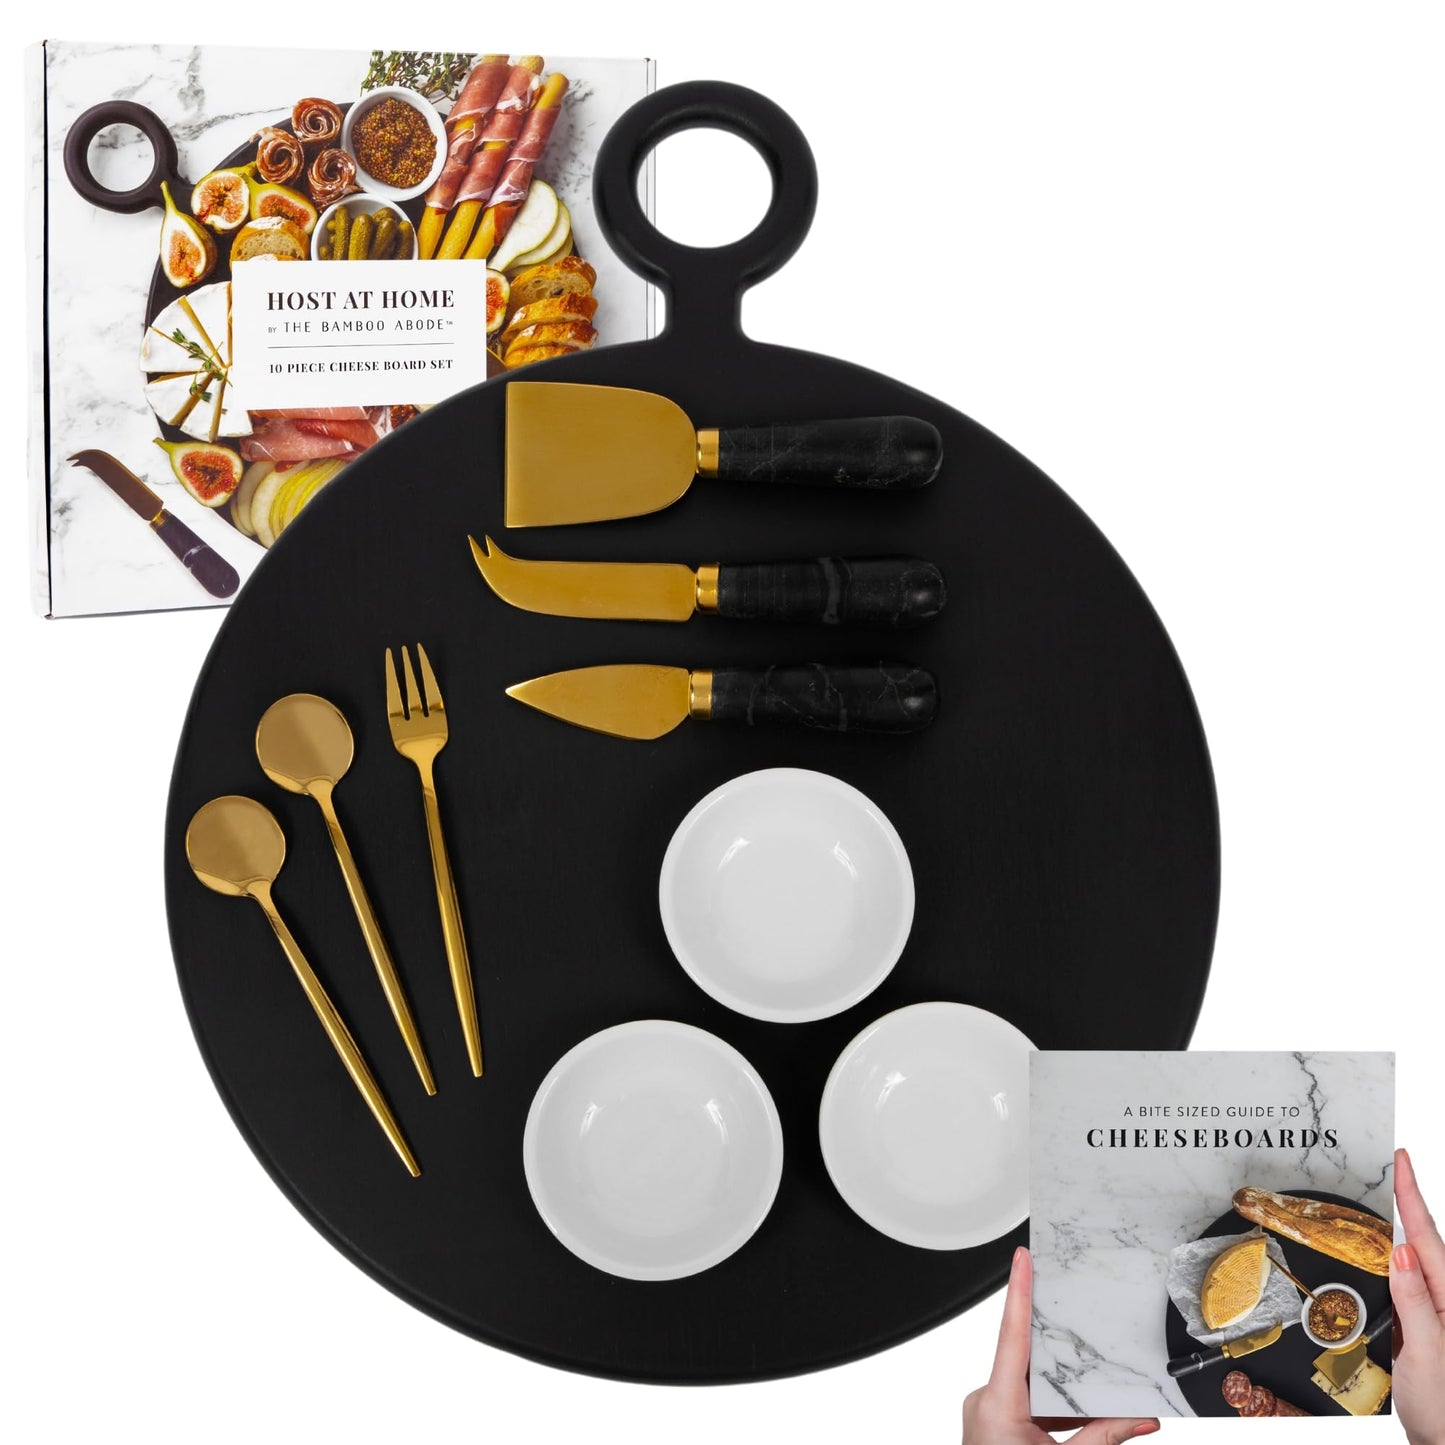 The 10 Piece Cheese and Charcuterie Board Set